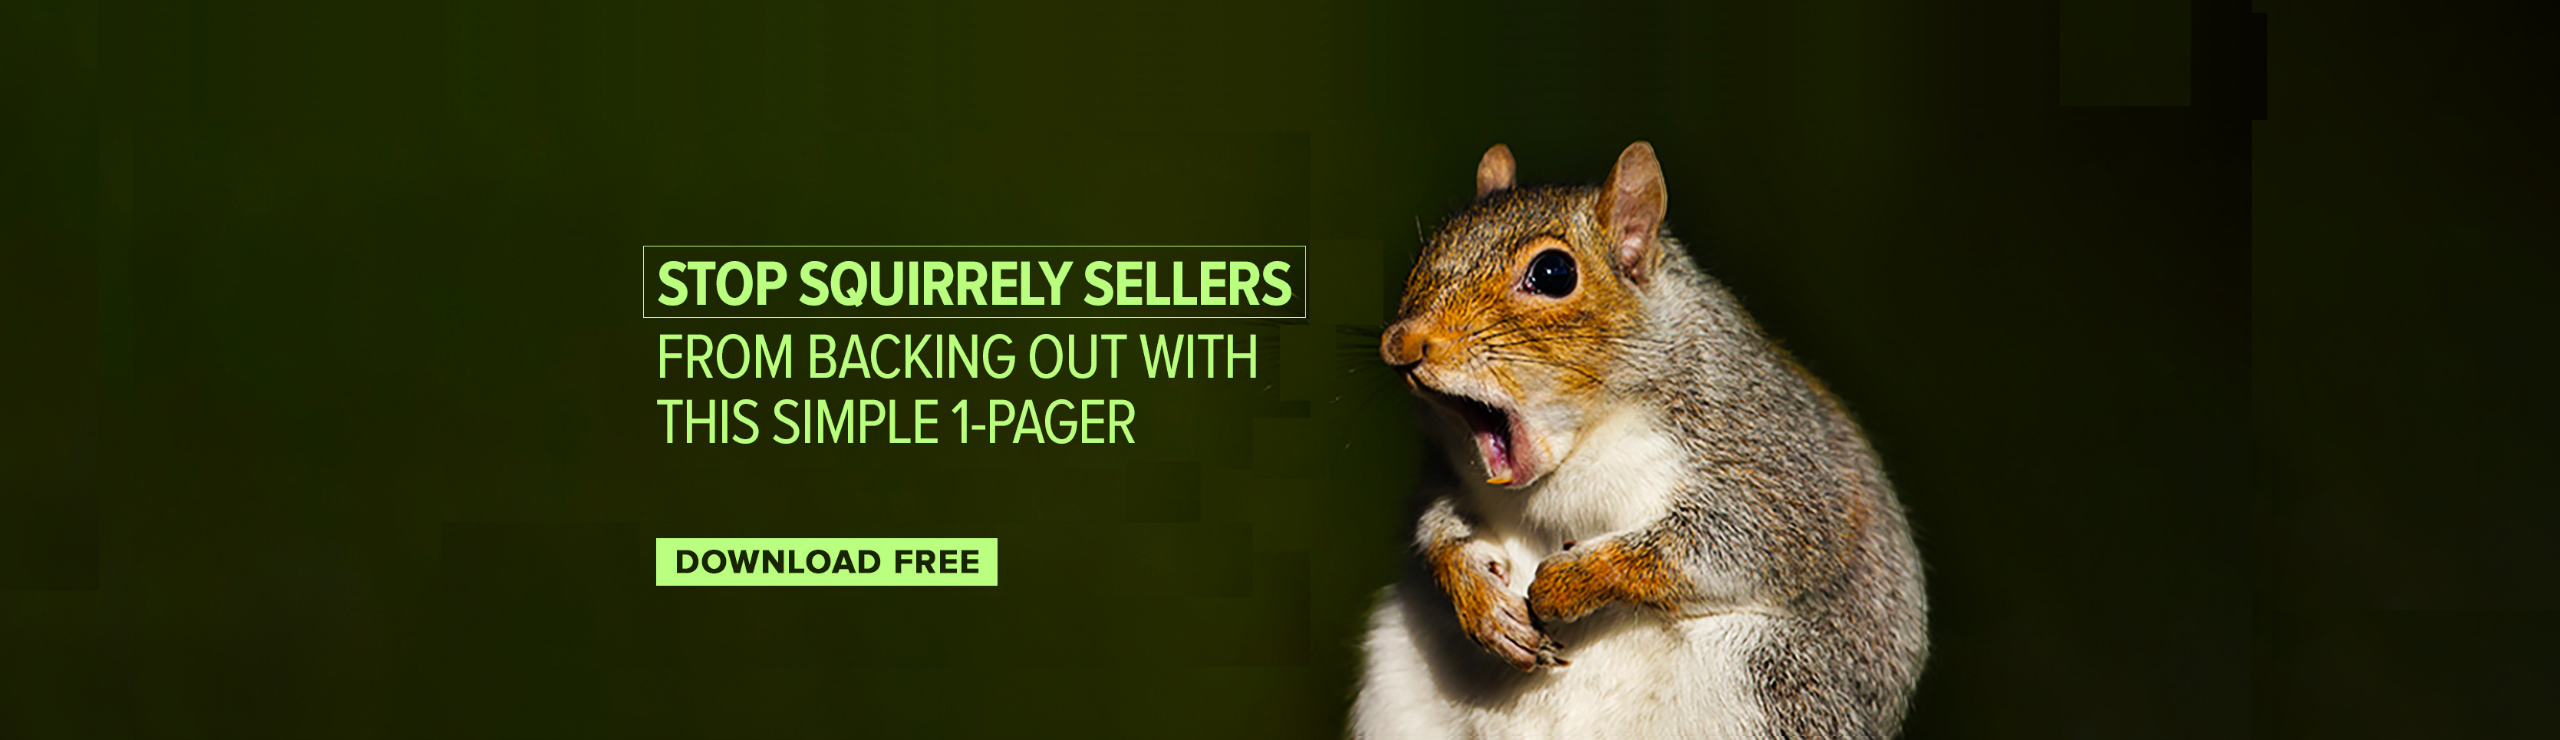 Stop Squirrely Sellers from Backing Out with this Simple 1-Pager [Free Download]